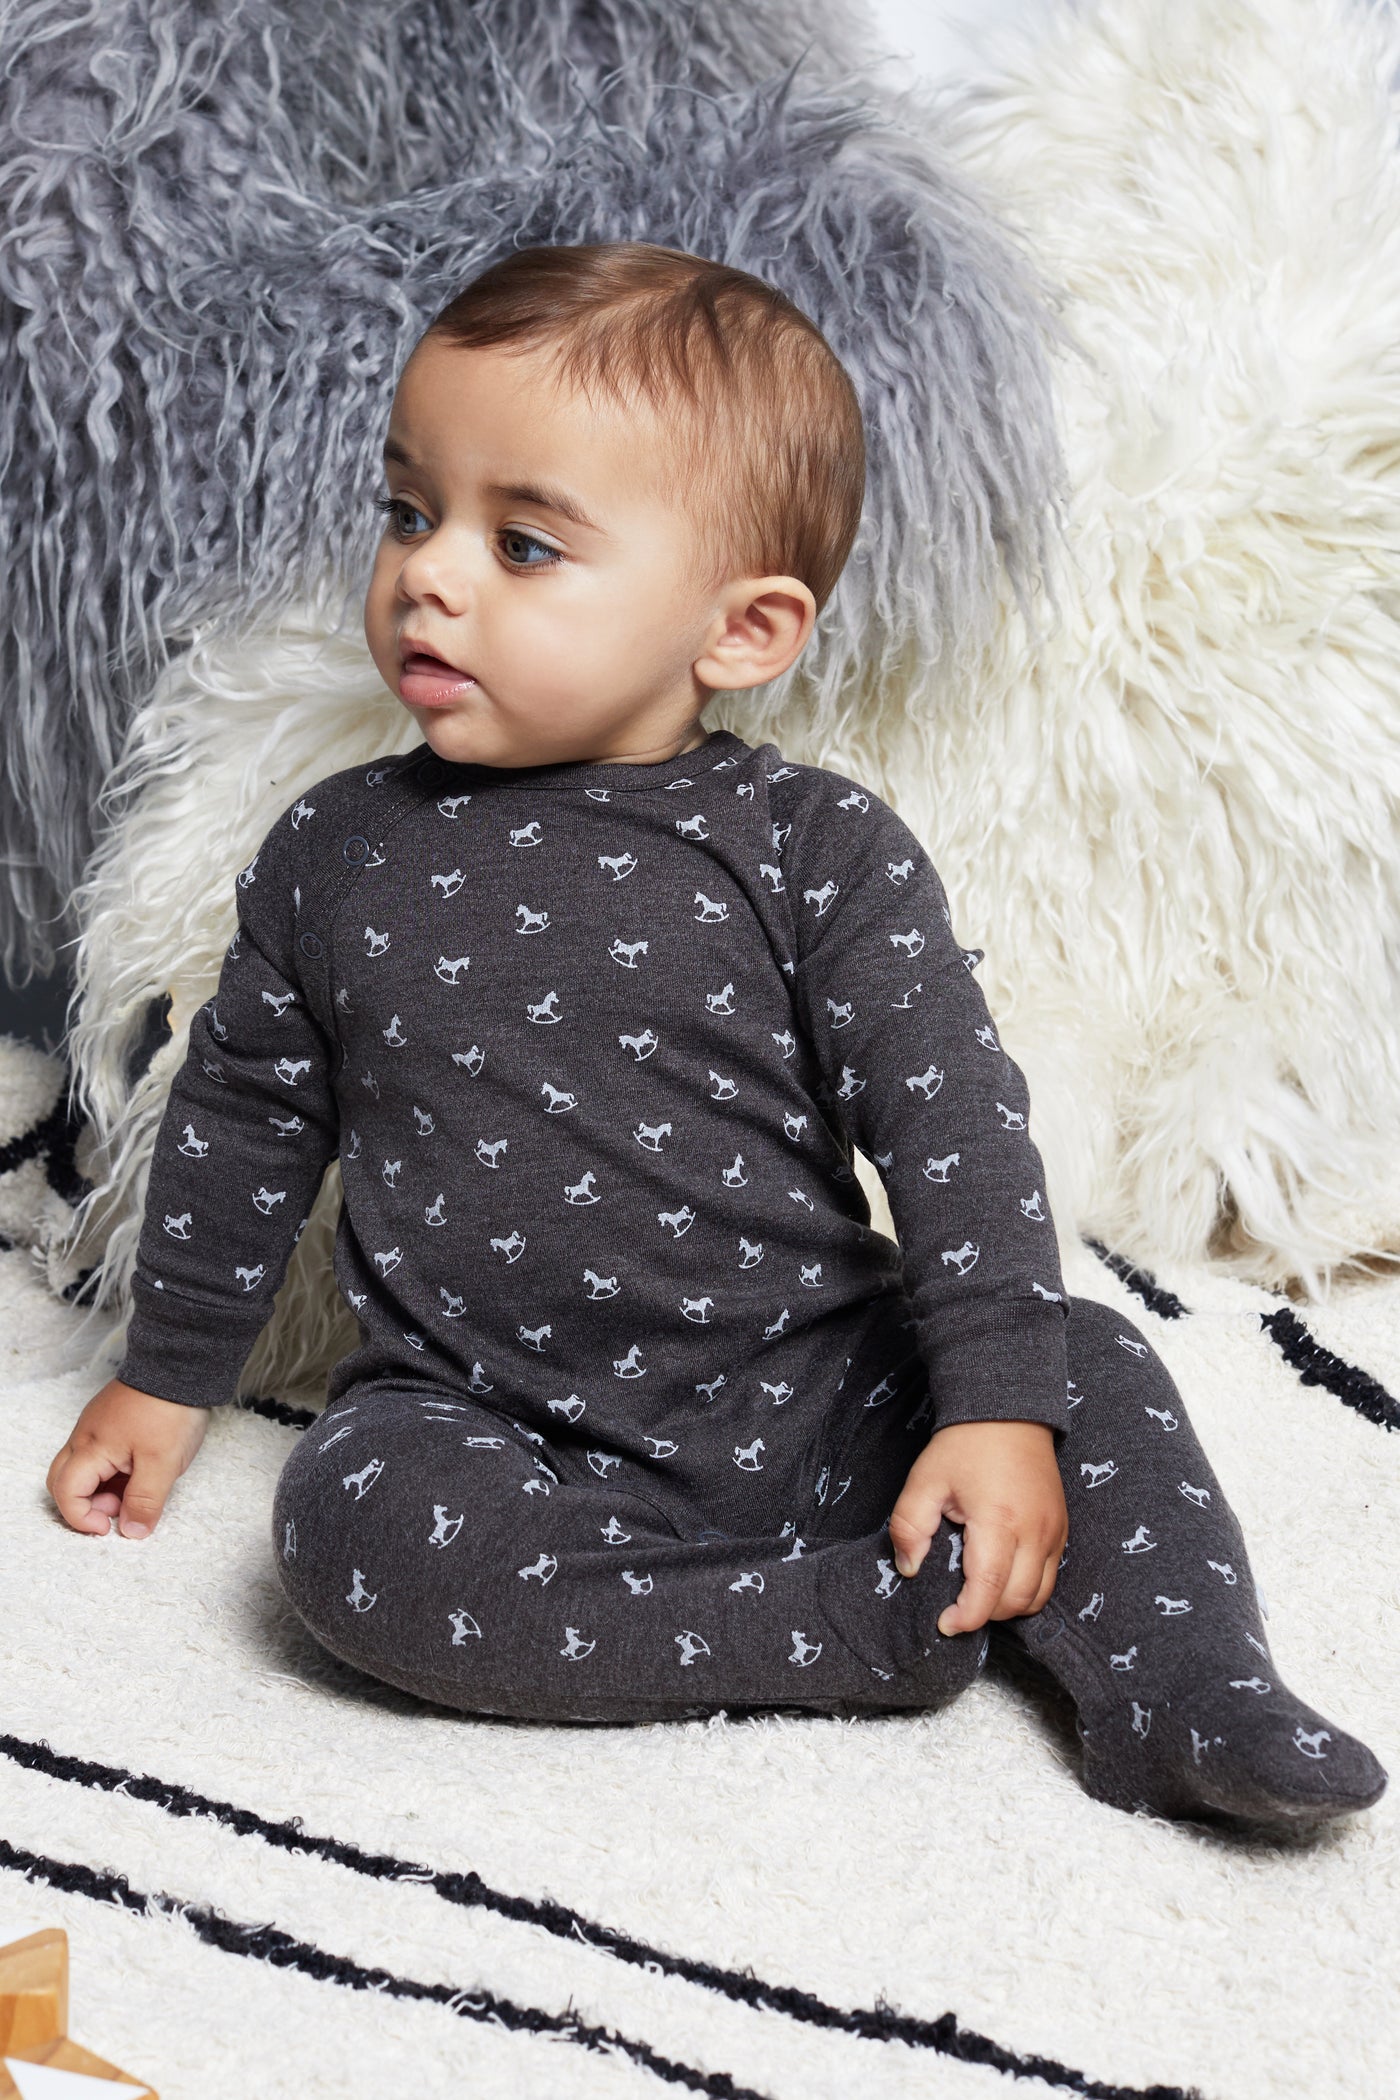 Super Soft Jersey Sleepsuit - charcoal